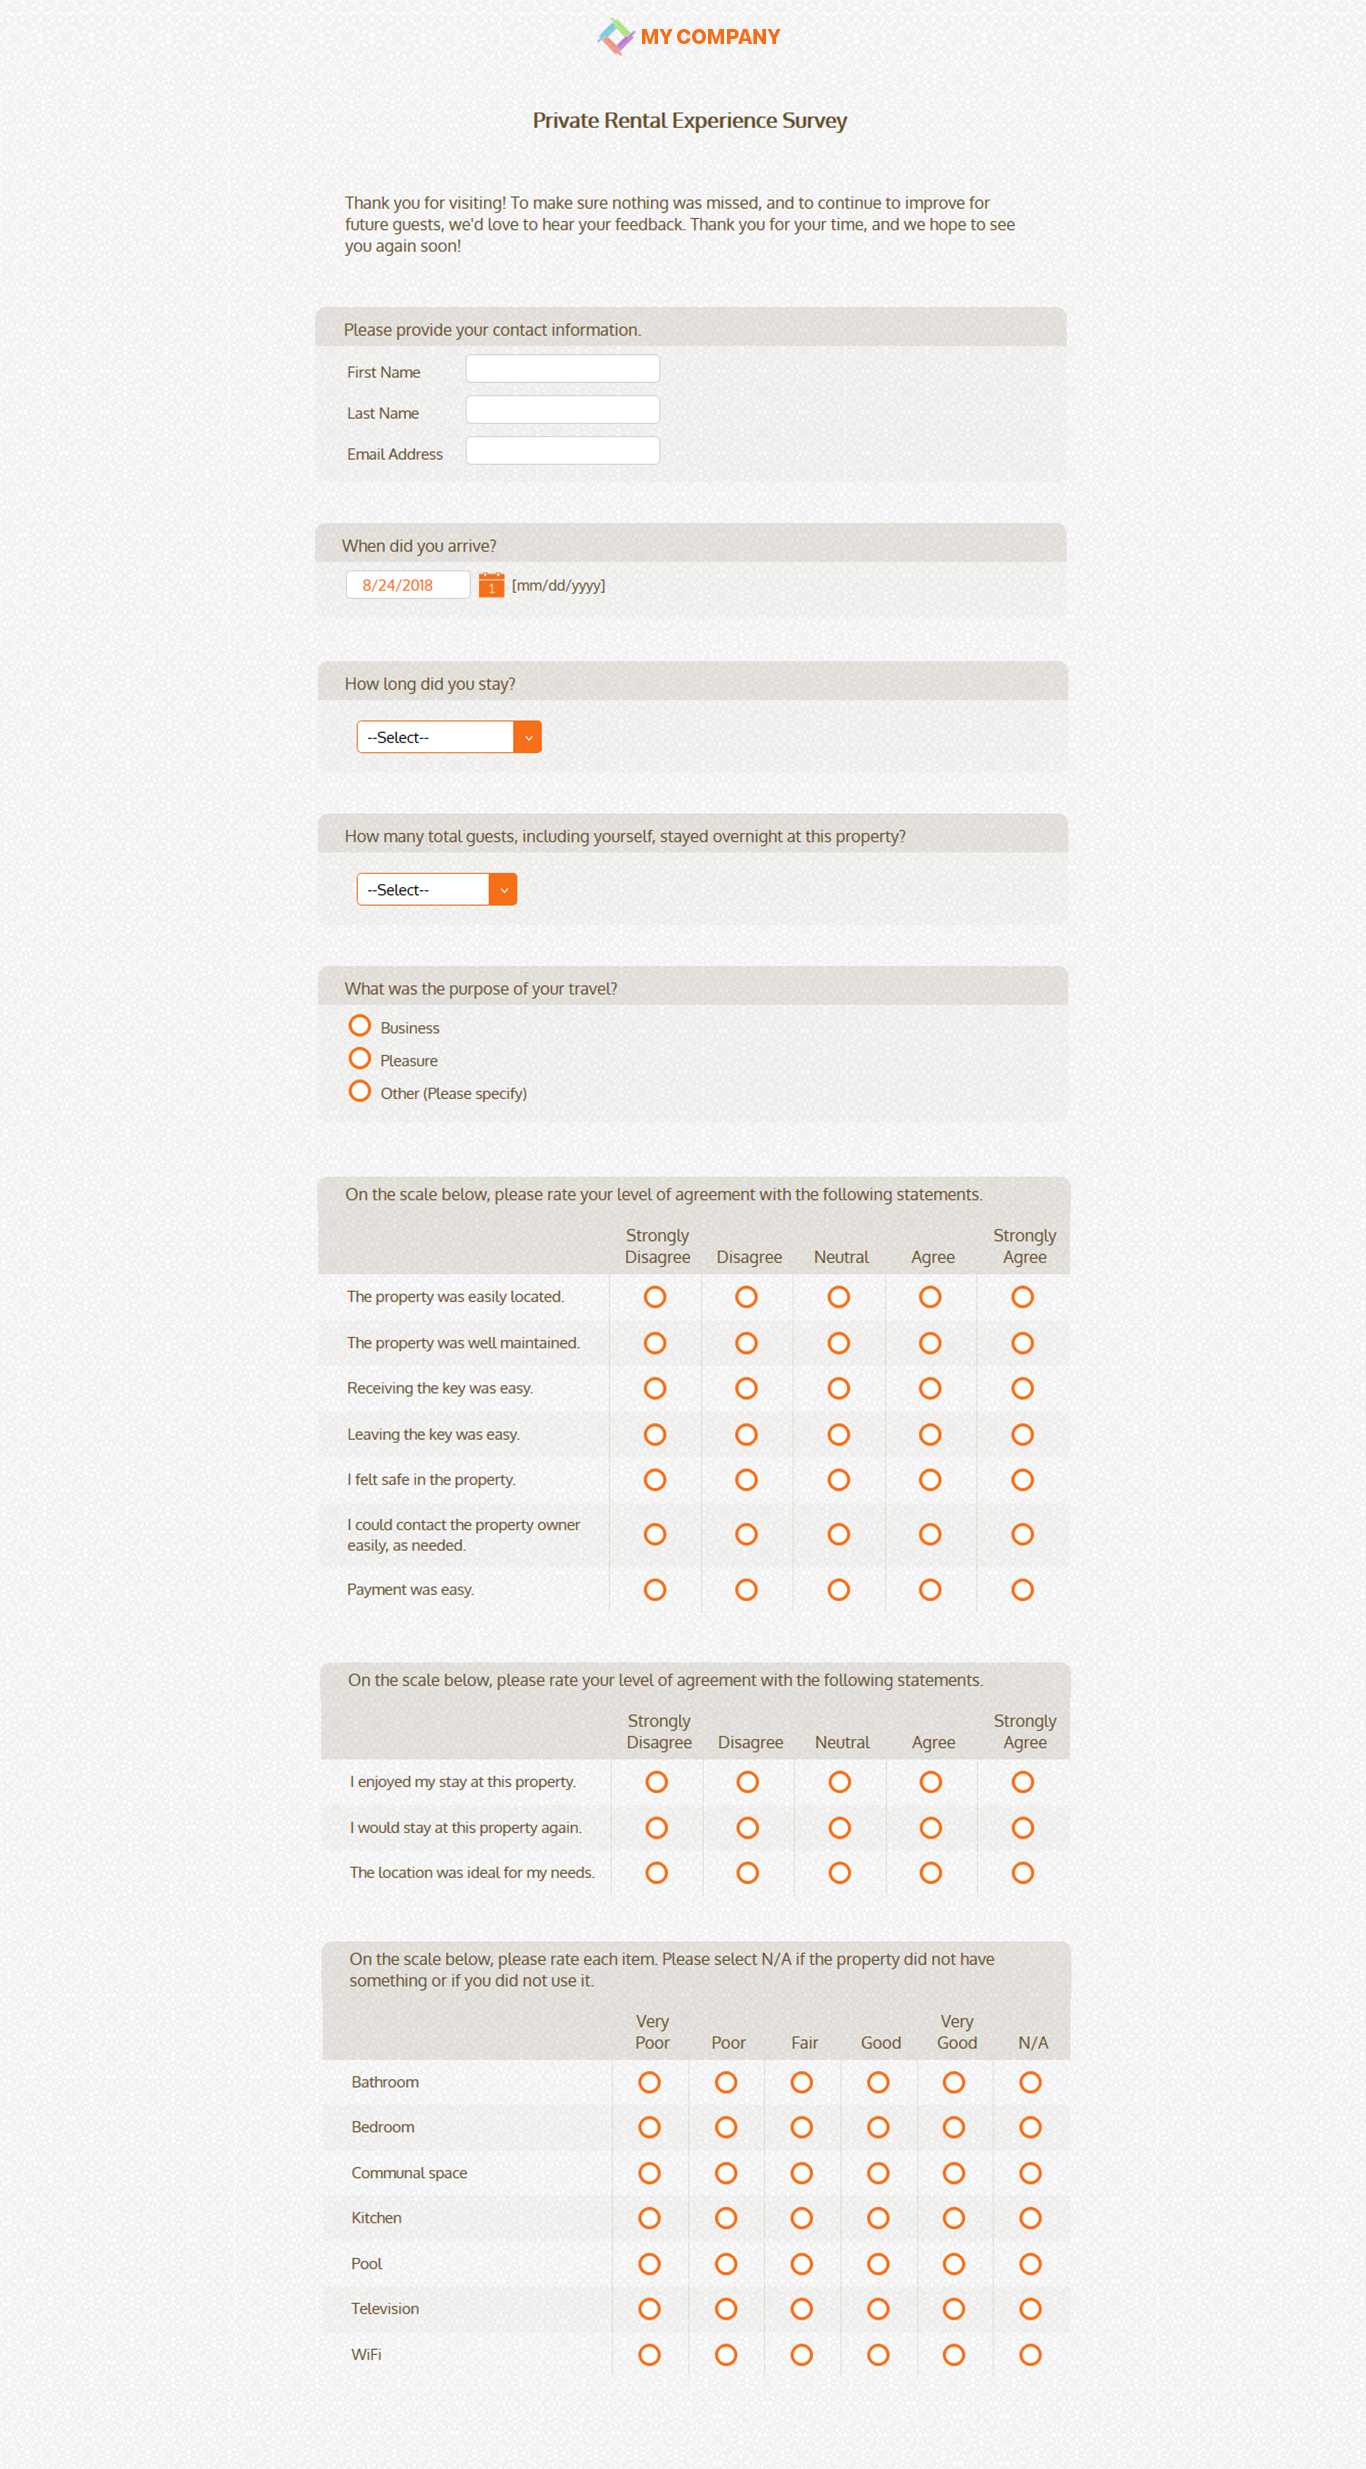 Rental Experience Survey Template [12 Questions] | Sogosurvey Regarding Poll Template For Word